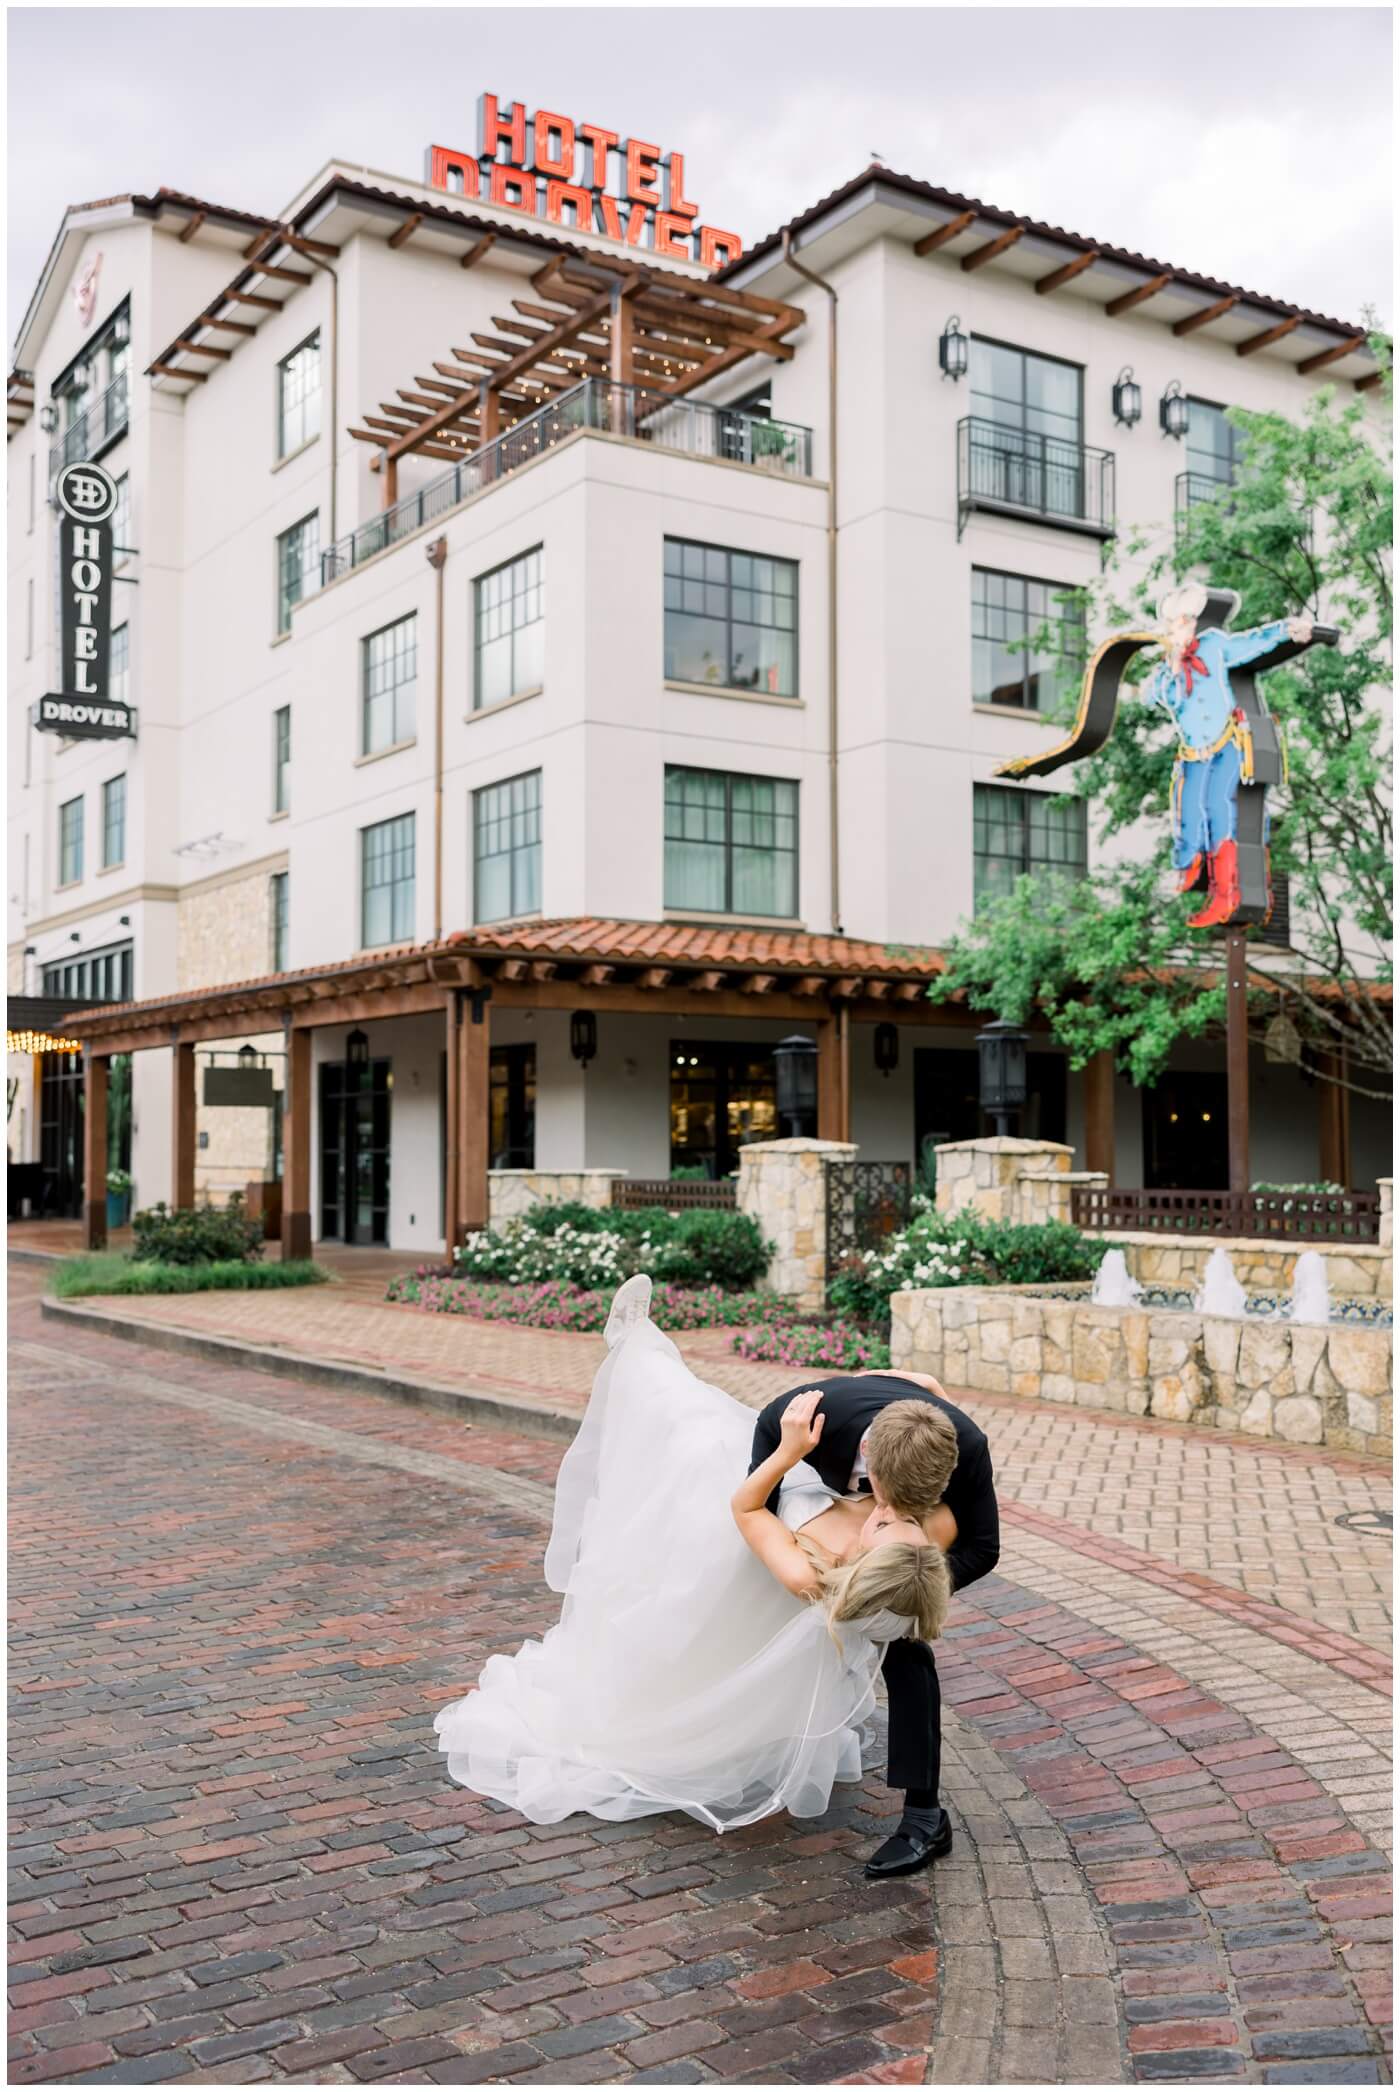 Bride and groom portraits at Hotel Drover